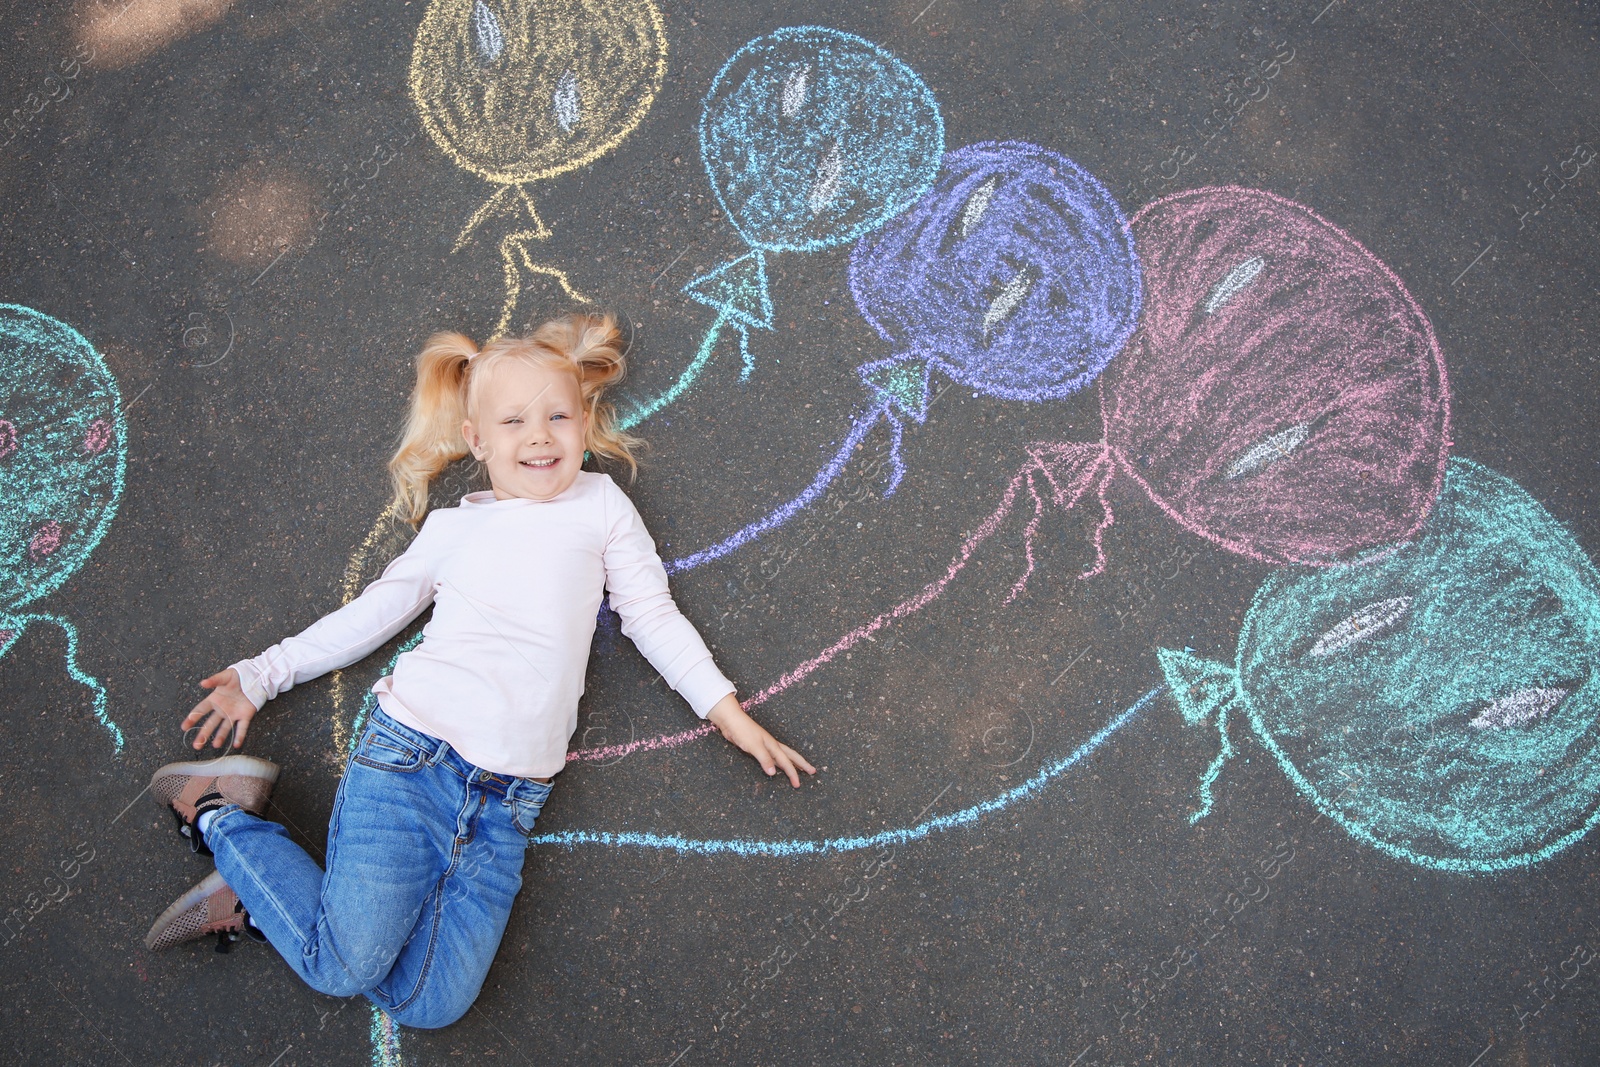 Photo of Little child lying near chalk drawing of balloons on asphalt, top view